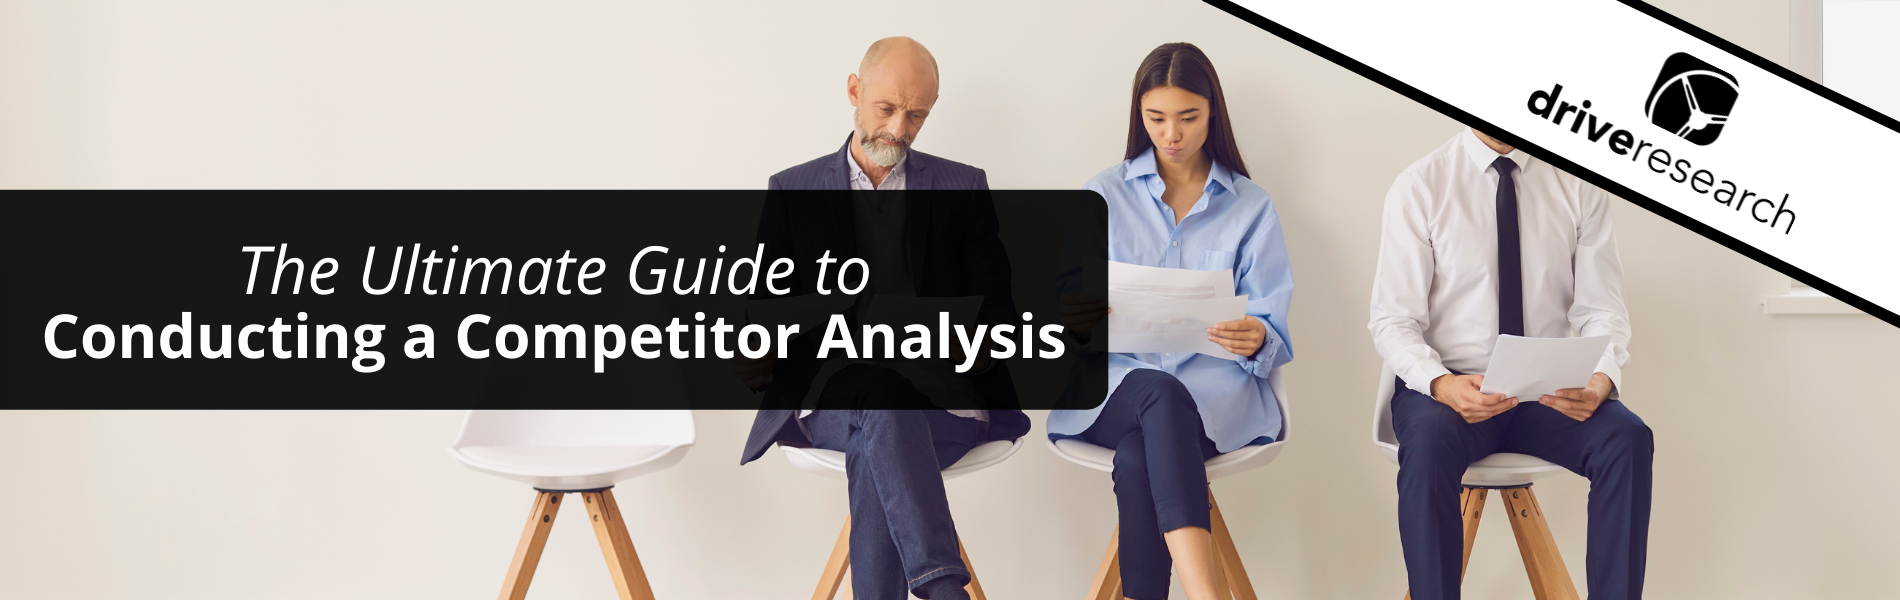 Ultimate Guide to Conducting a Competitor Analysis